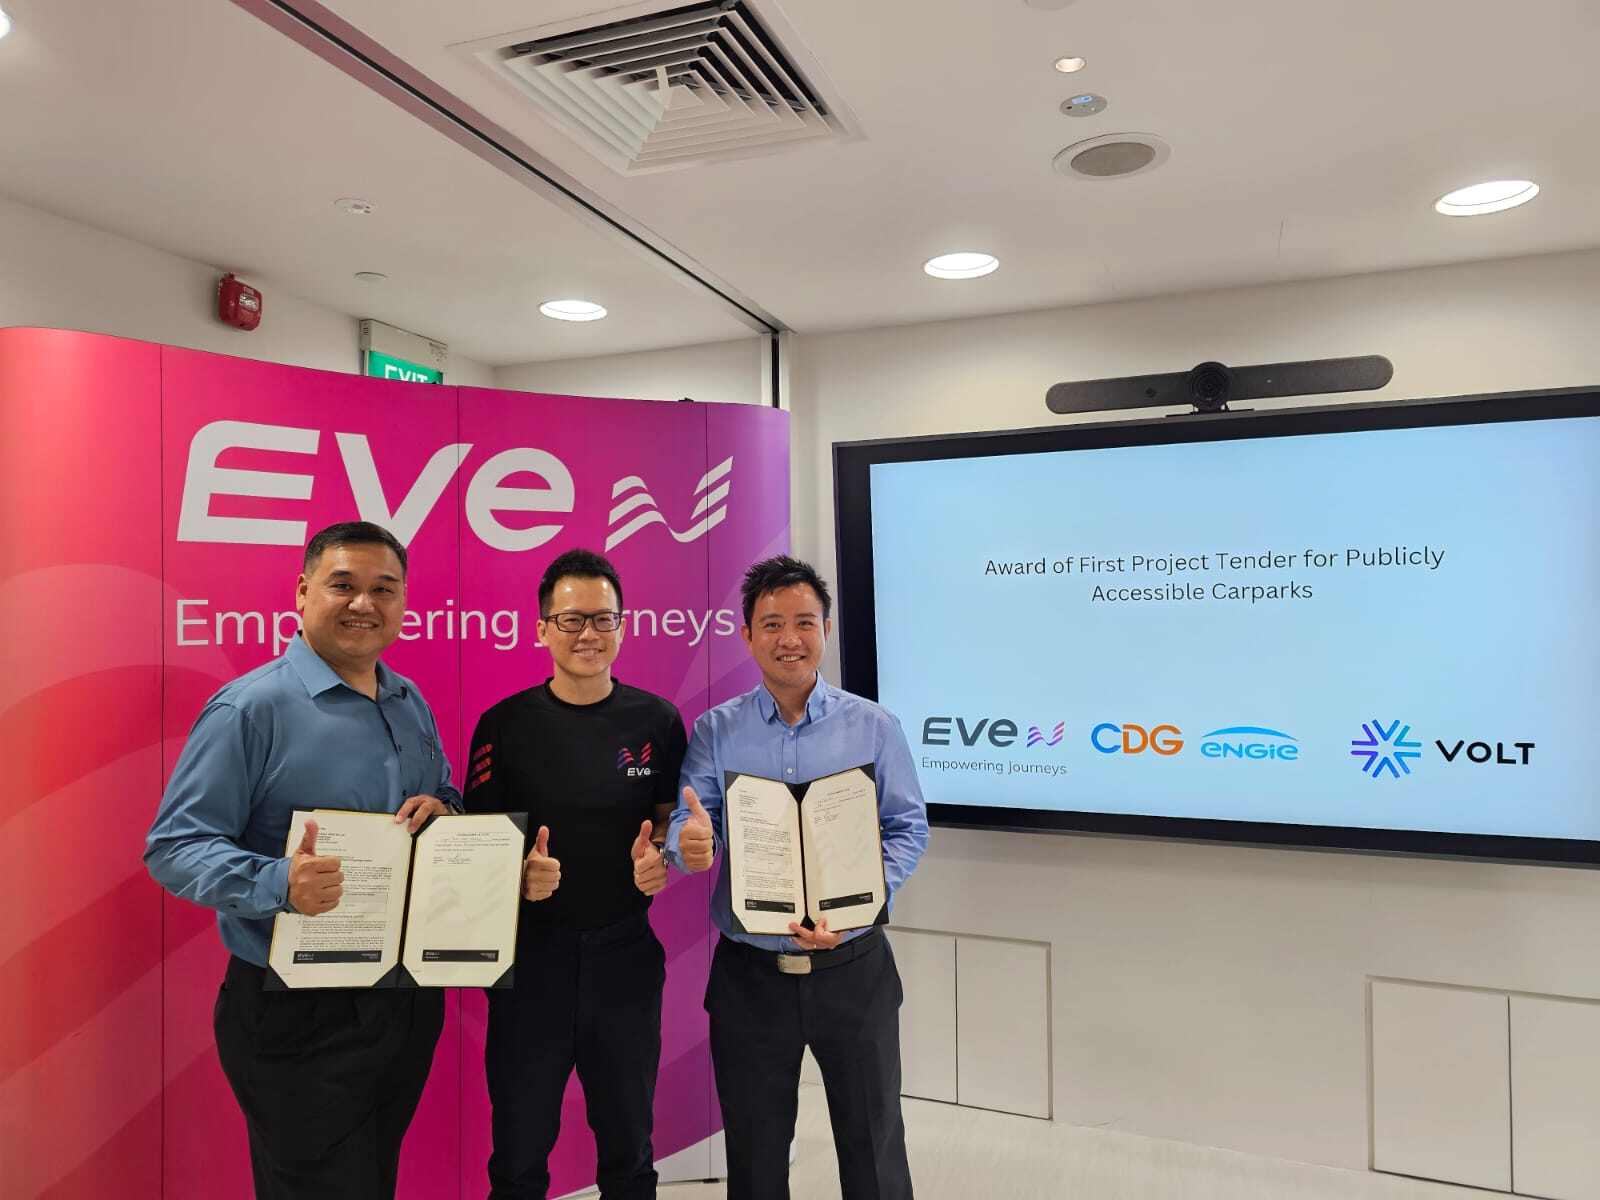 Signing ceremony of CDG-ENGIE and Volt Singapore